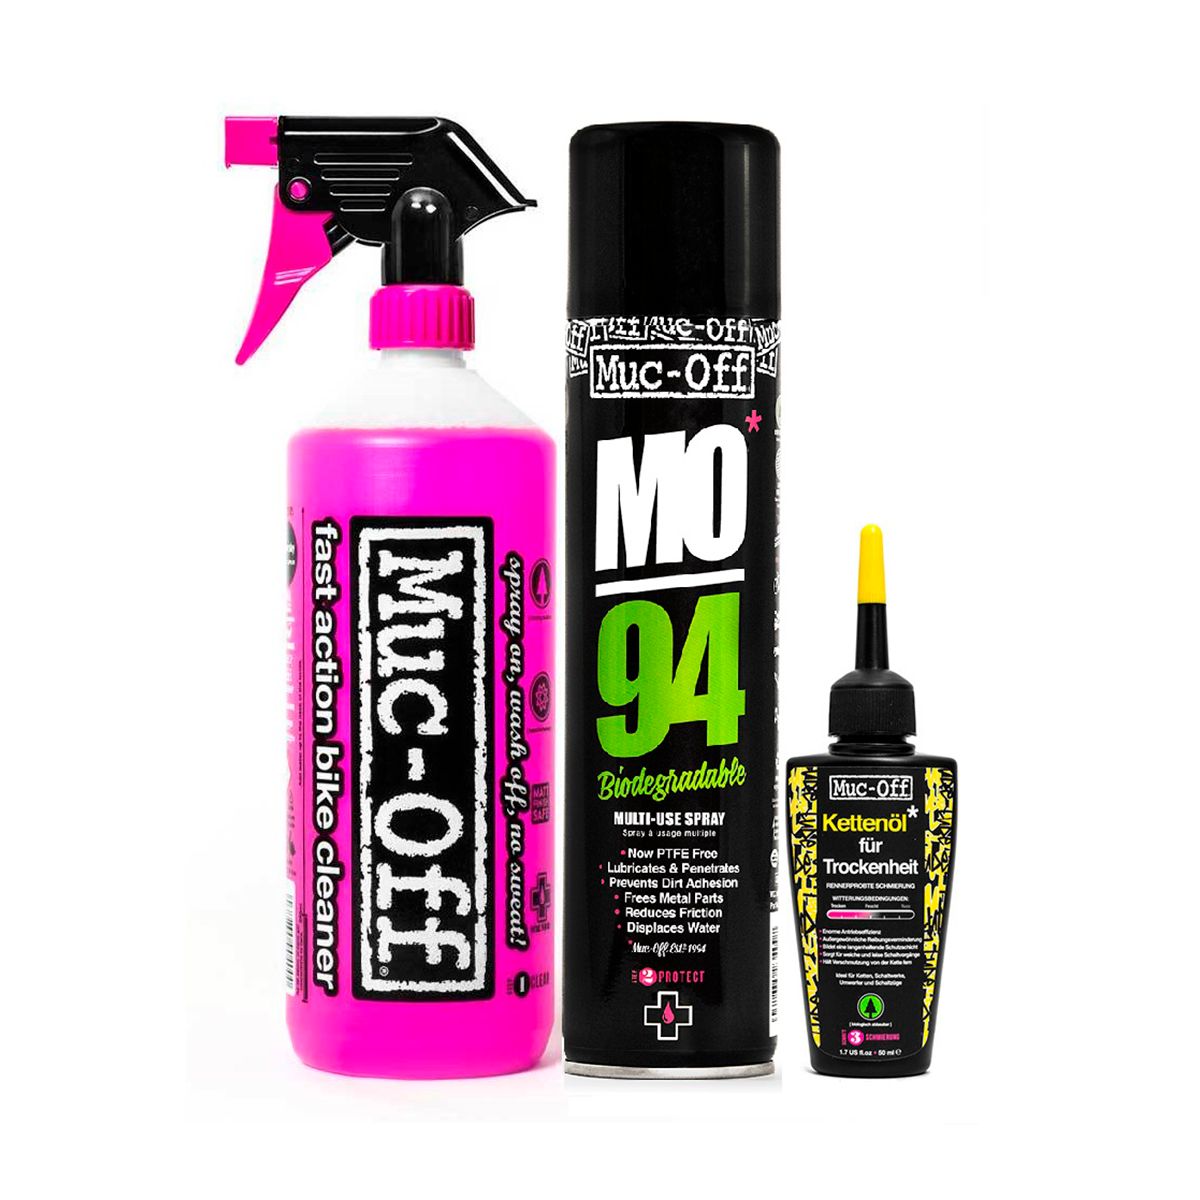 Billede af Muc-Off - Wash, Protect and Dry Lube Kit hos Cyclesport Silkeborg